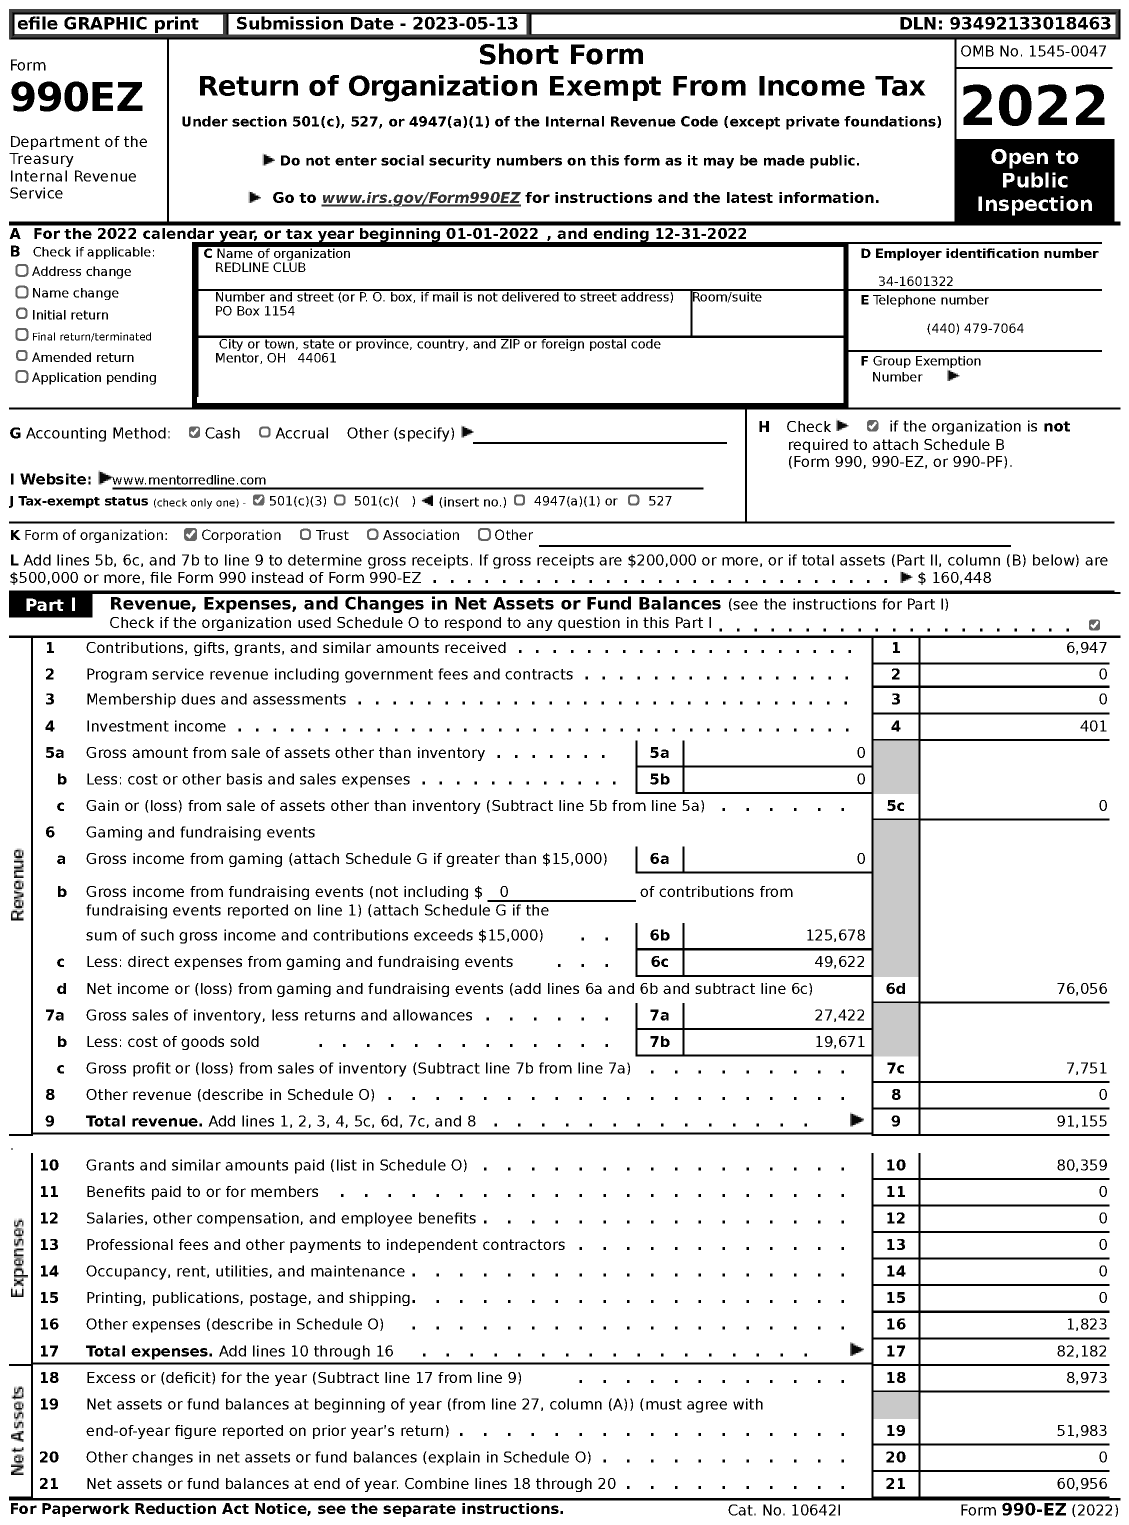 Image of first page of 2022 Form 990EZ for Redline Club